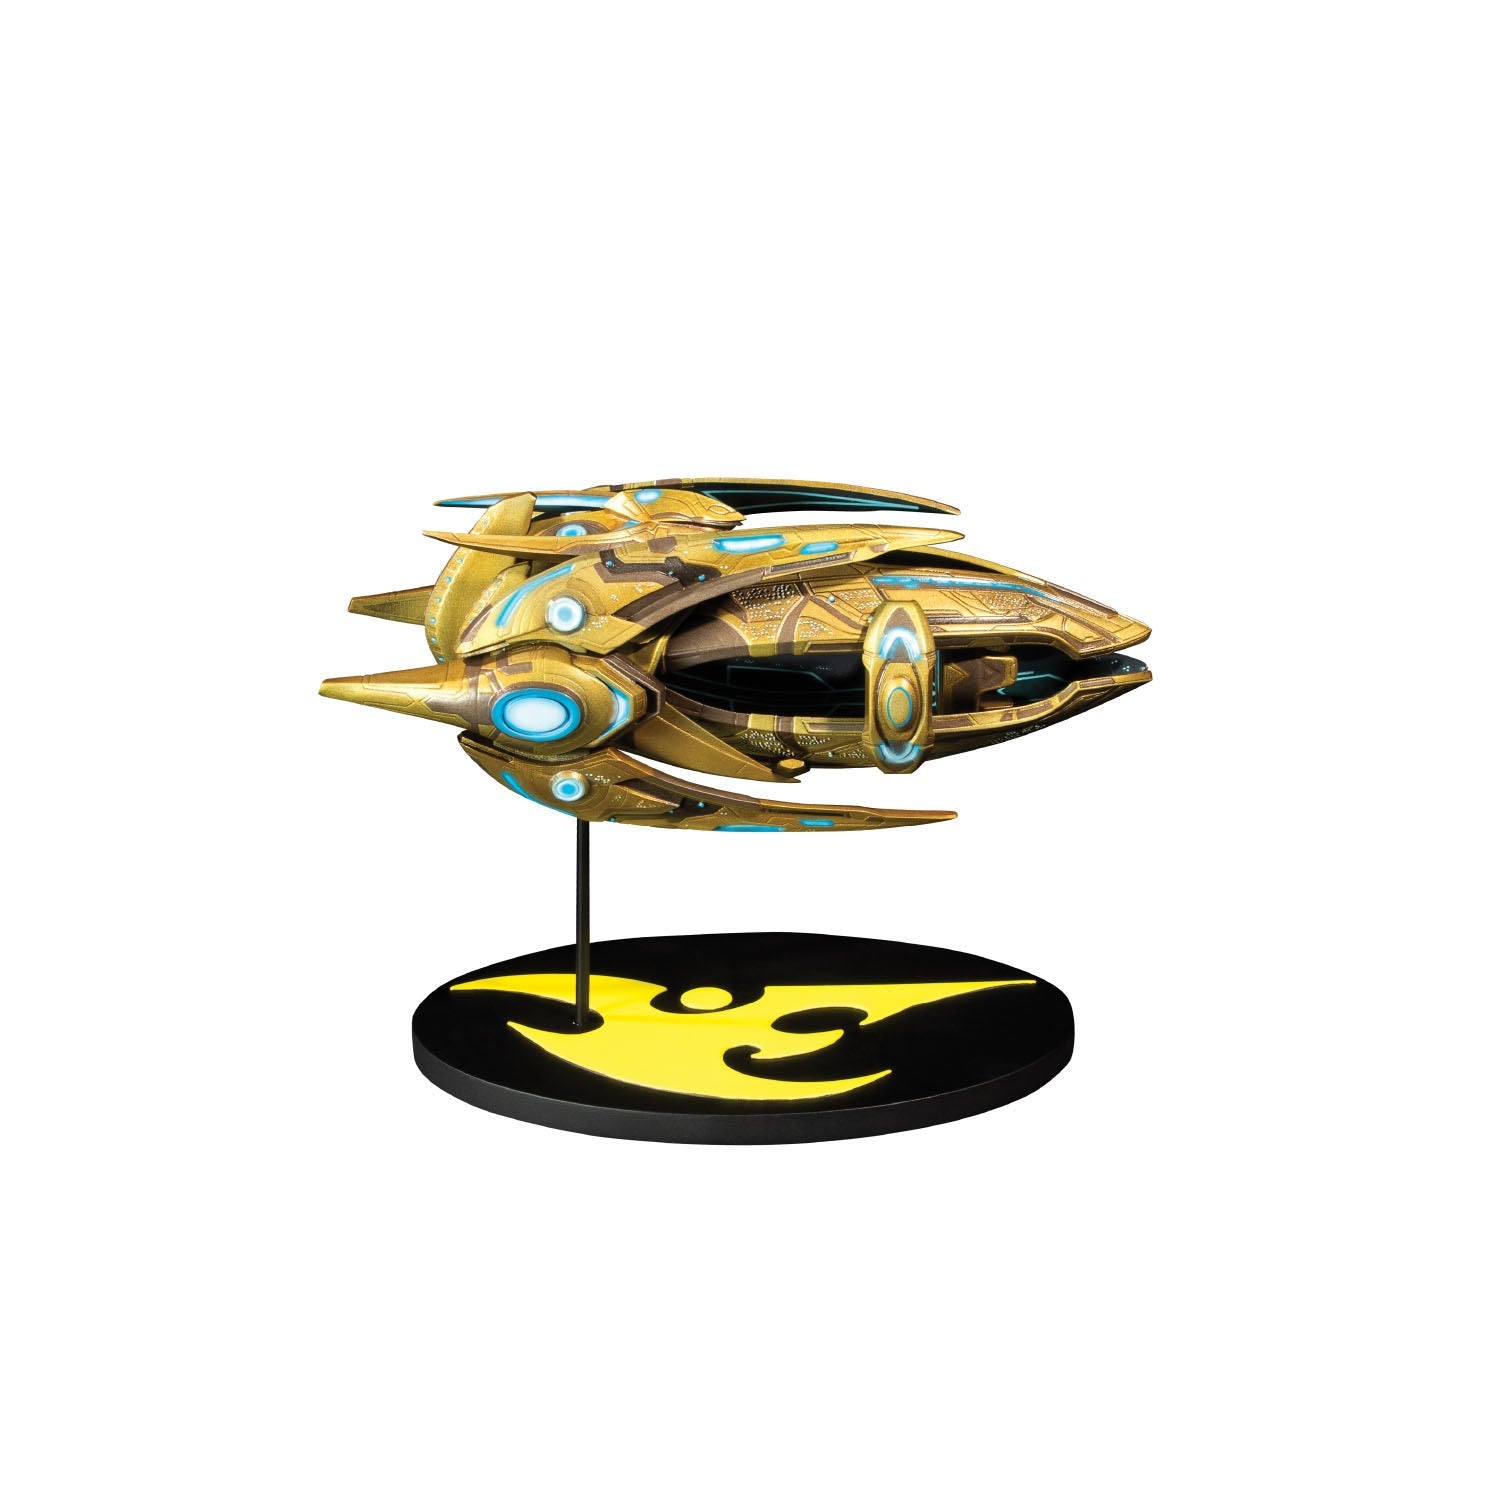 StarCraft Protoss Carrier Ship 7" Replica in Gold - Right View